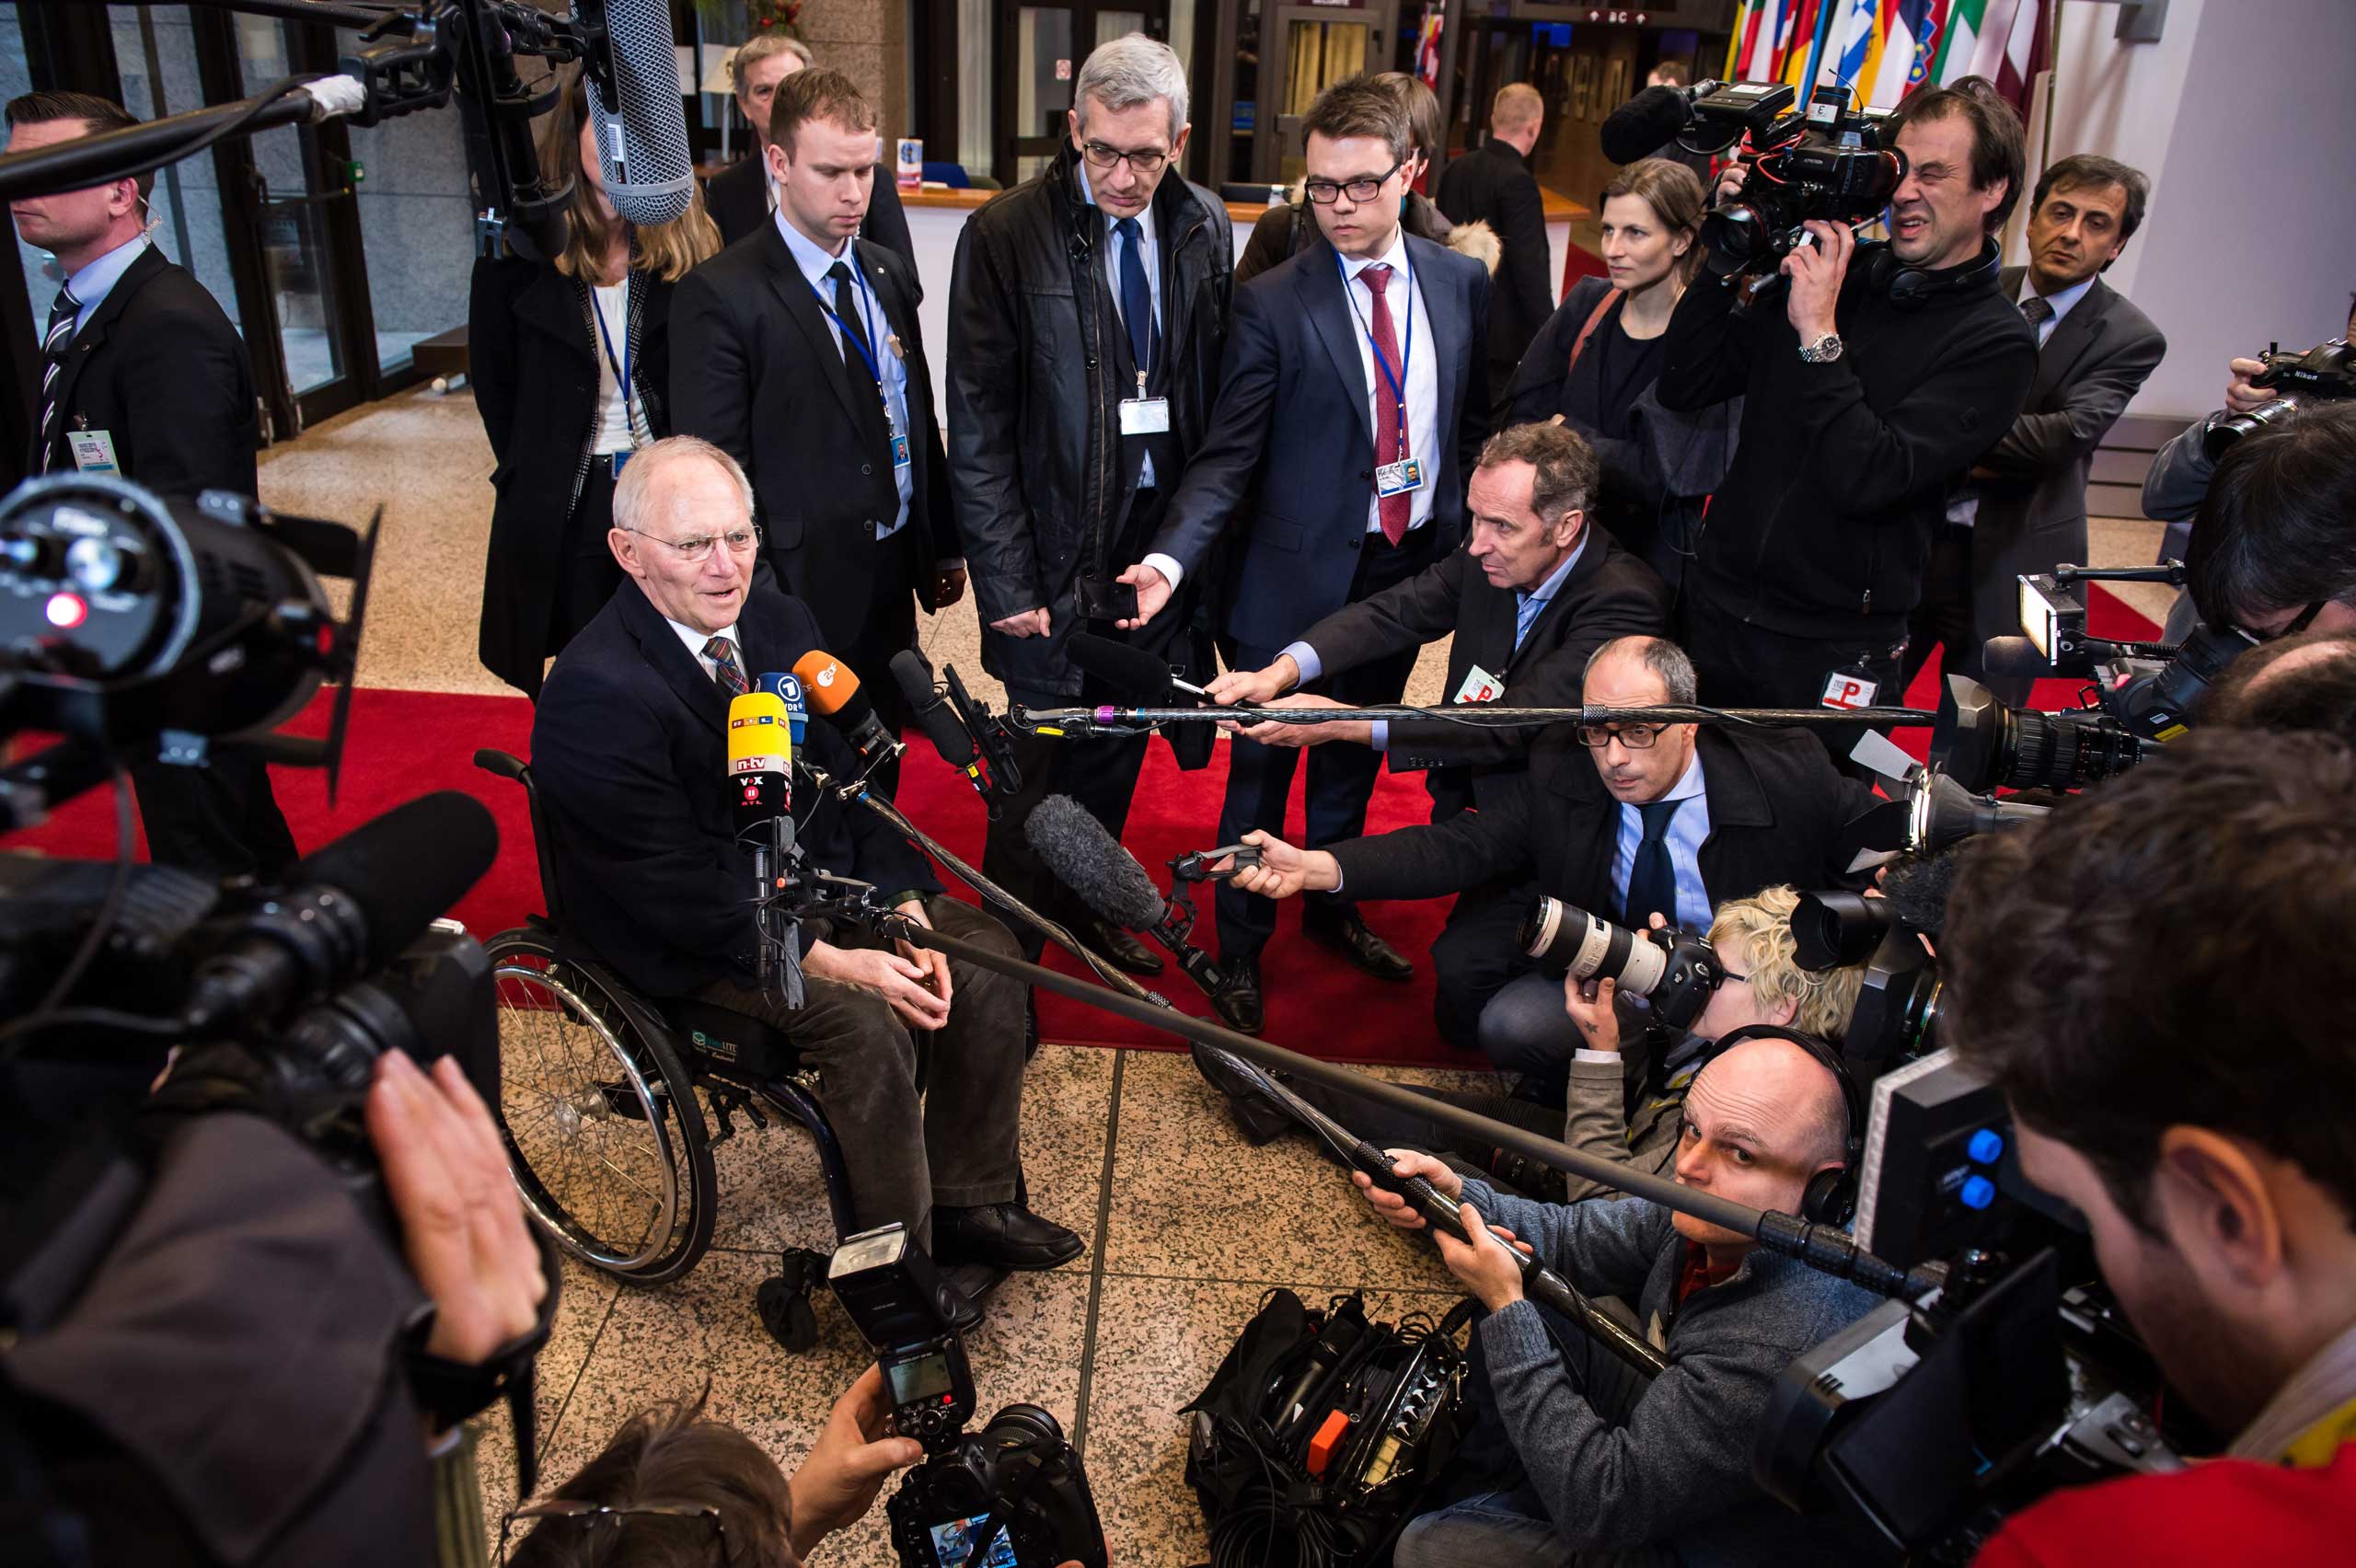 German Finance Minister Wolfgang Schaeuble, left, talks with journalists as he arrives for a meeting of Eurogroup finance ministers at the EU Council building in Brussels on Monday, Feb. 16, 2015. (Geert Vanden Wijngaert&mdash;AP)